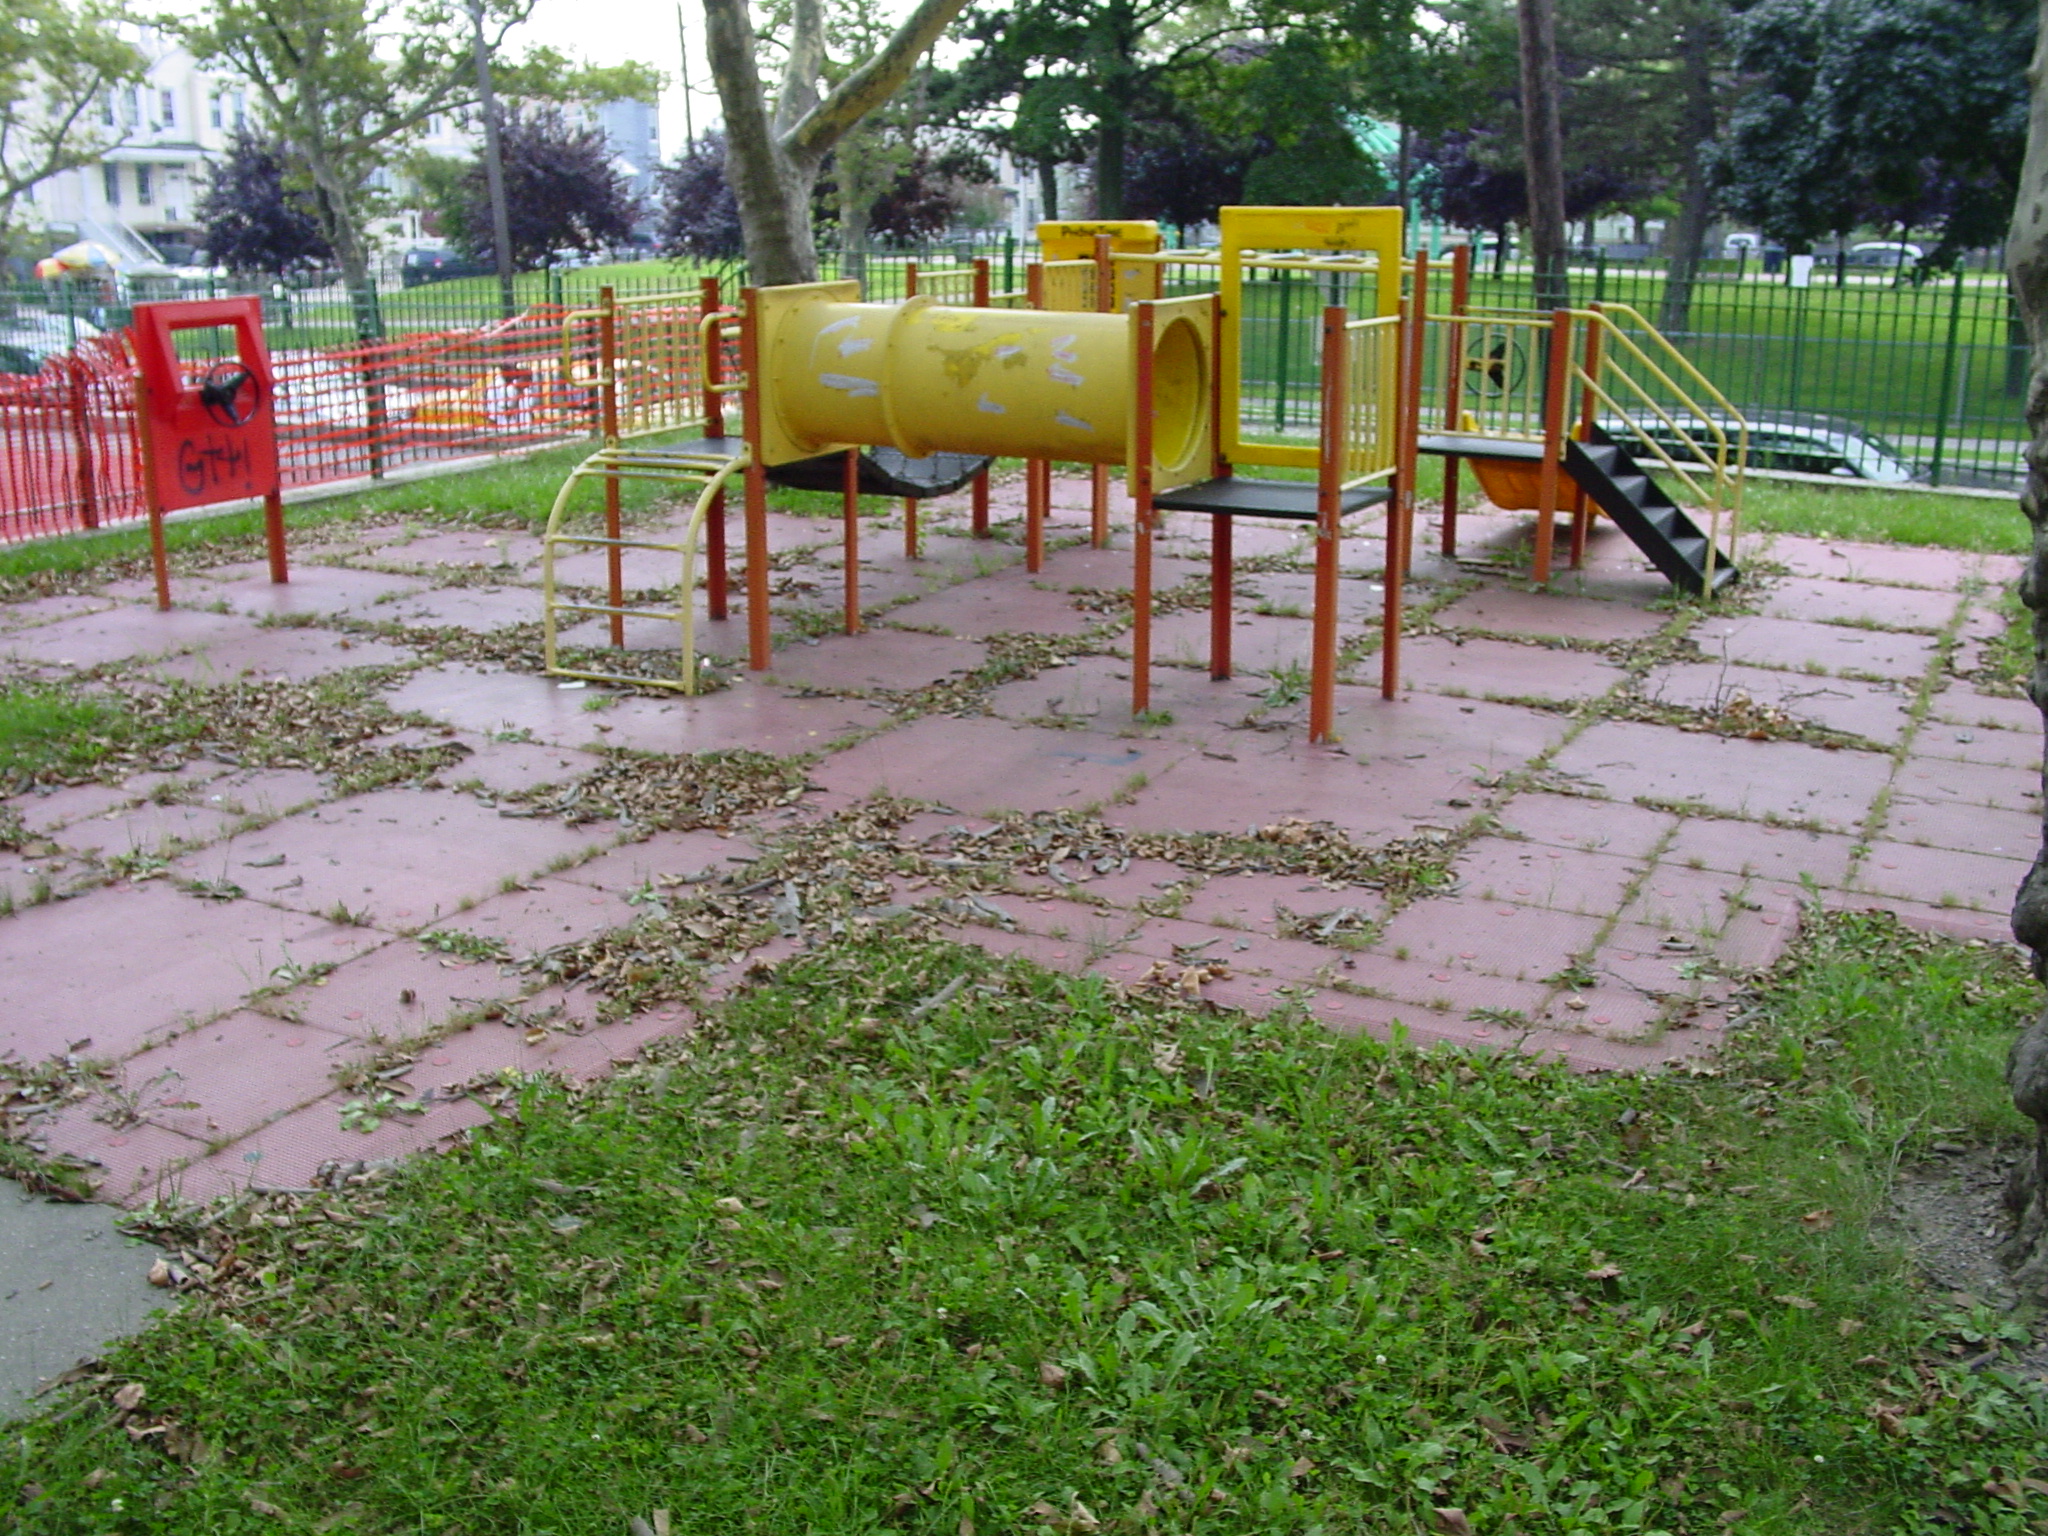 Large Public Park with Multiple Playgrounds Using Designs a